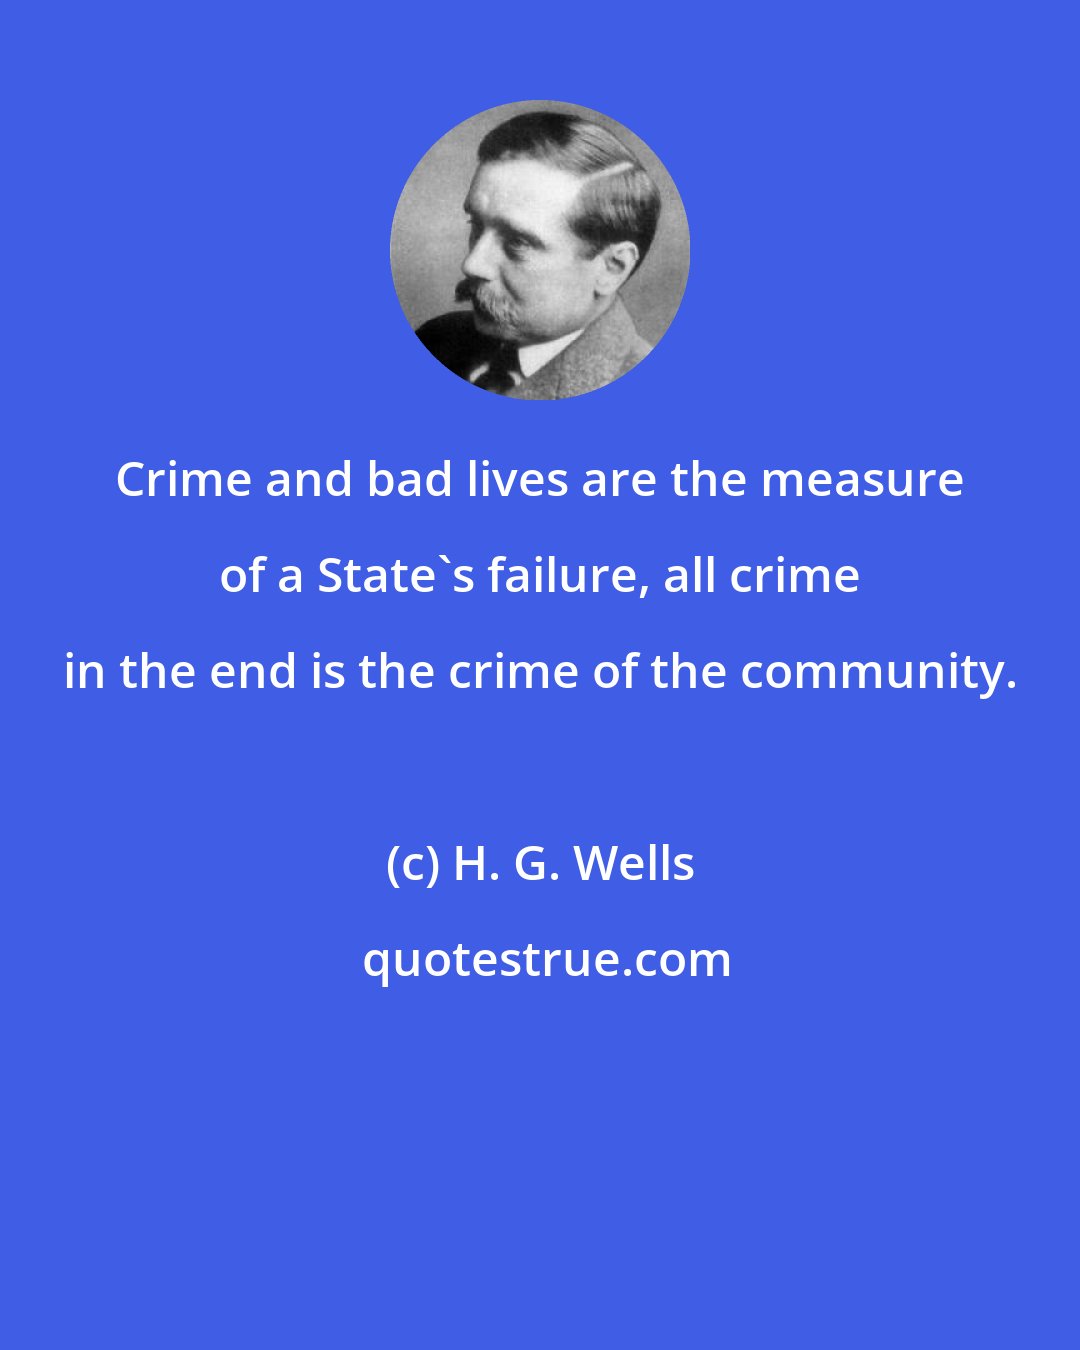 H. G. Wells: Crime and bad lives are the measure of a State's failure, all crime in the end is the crime of the community.